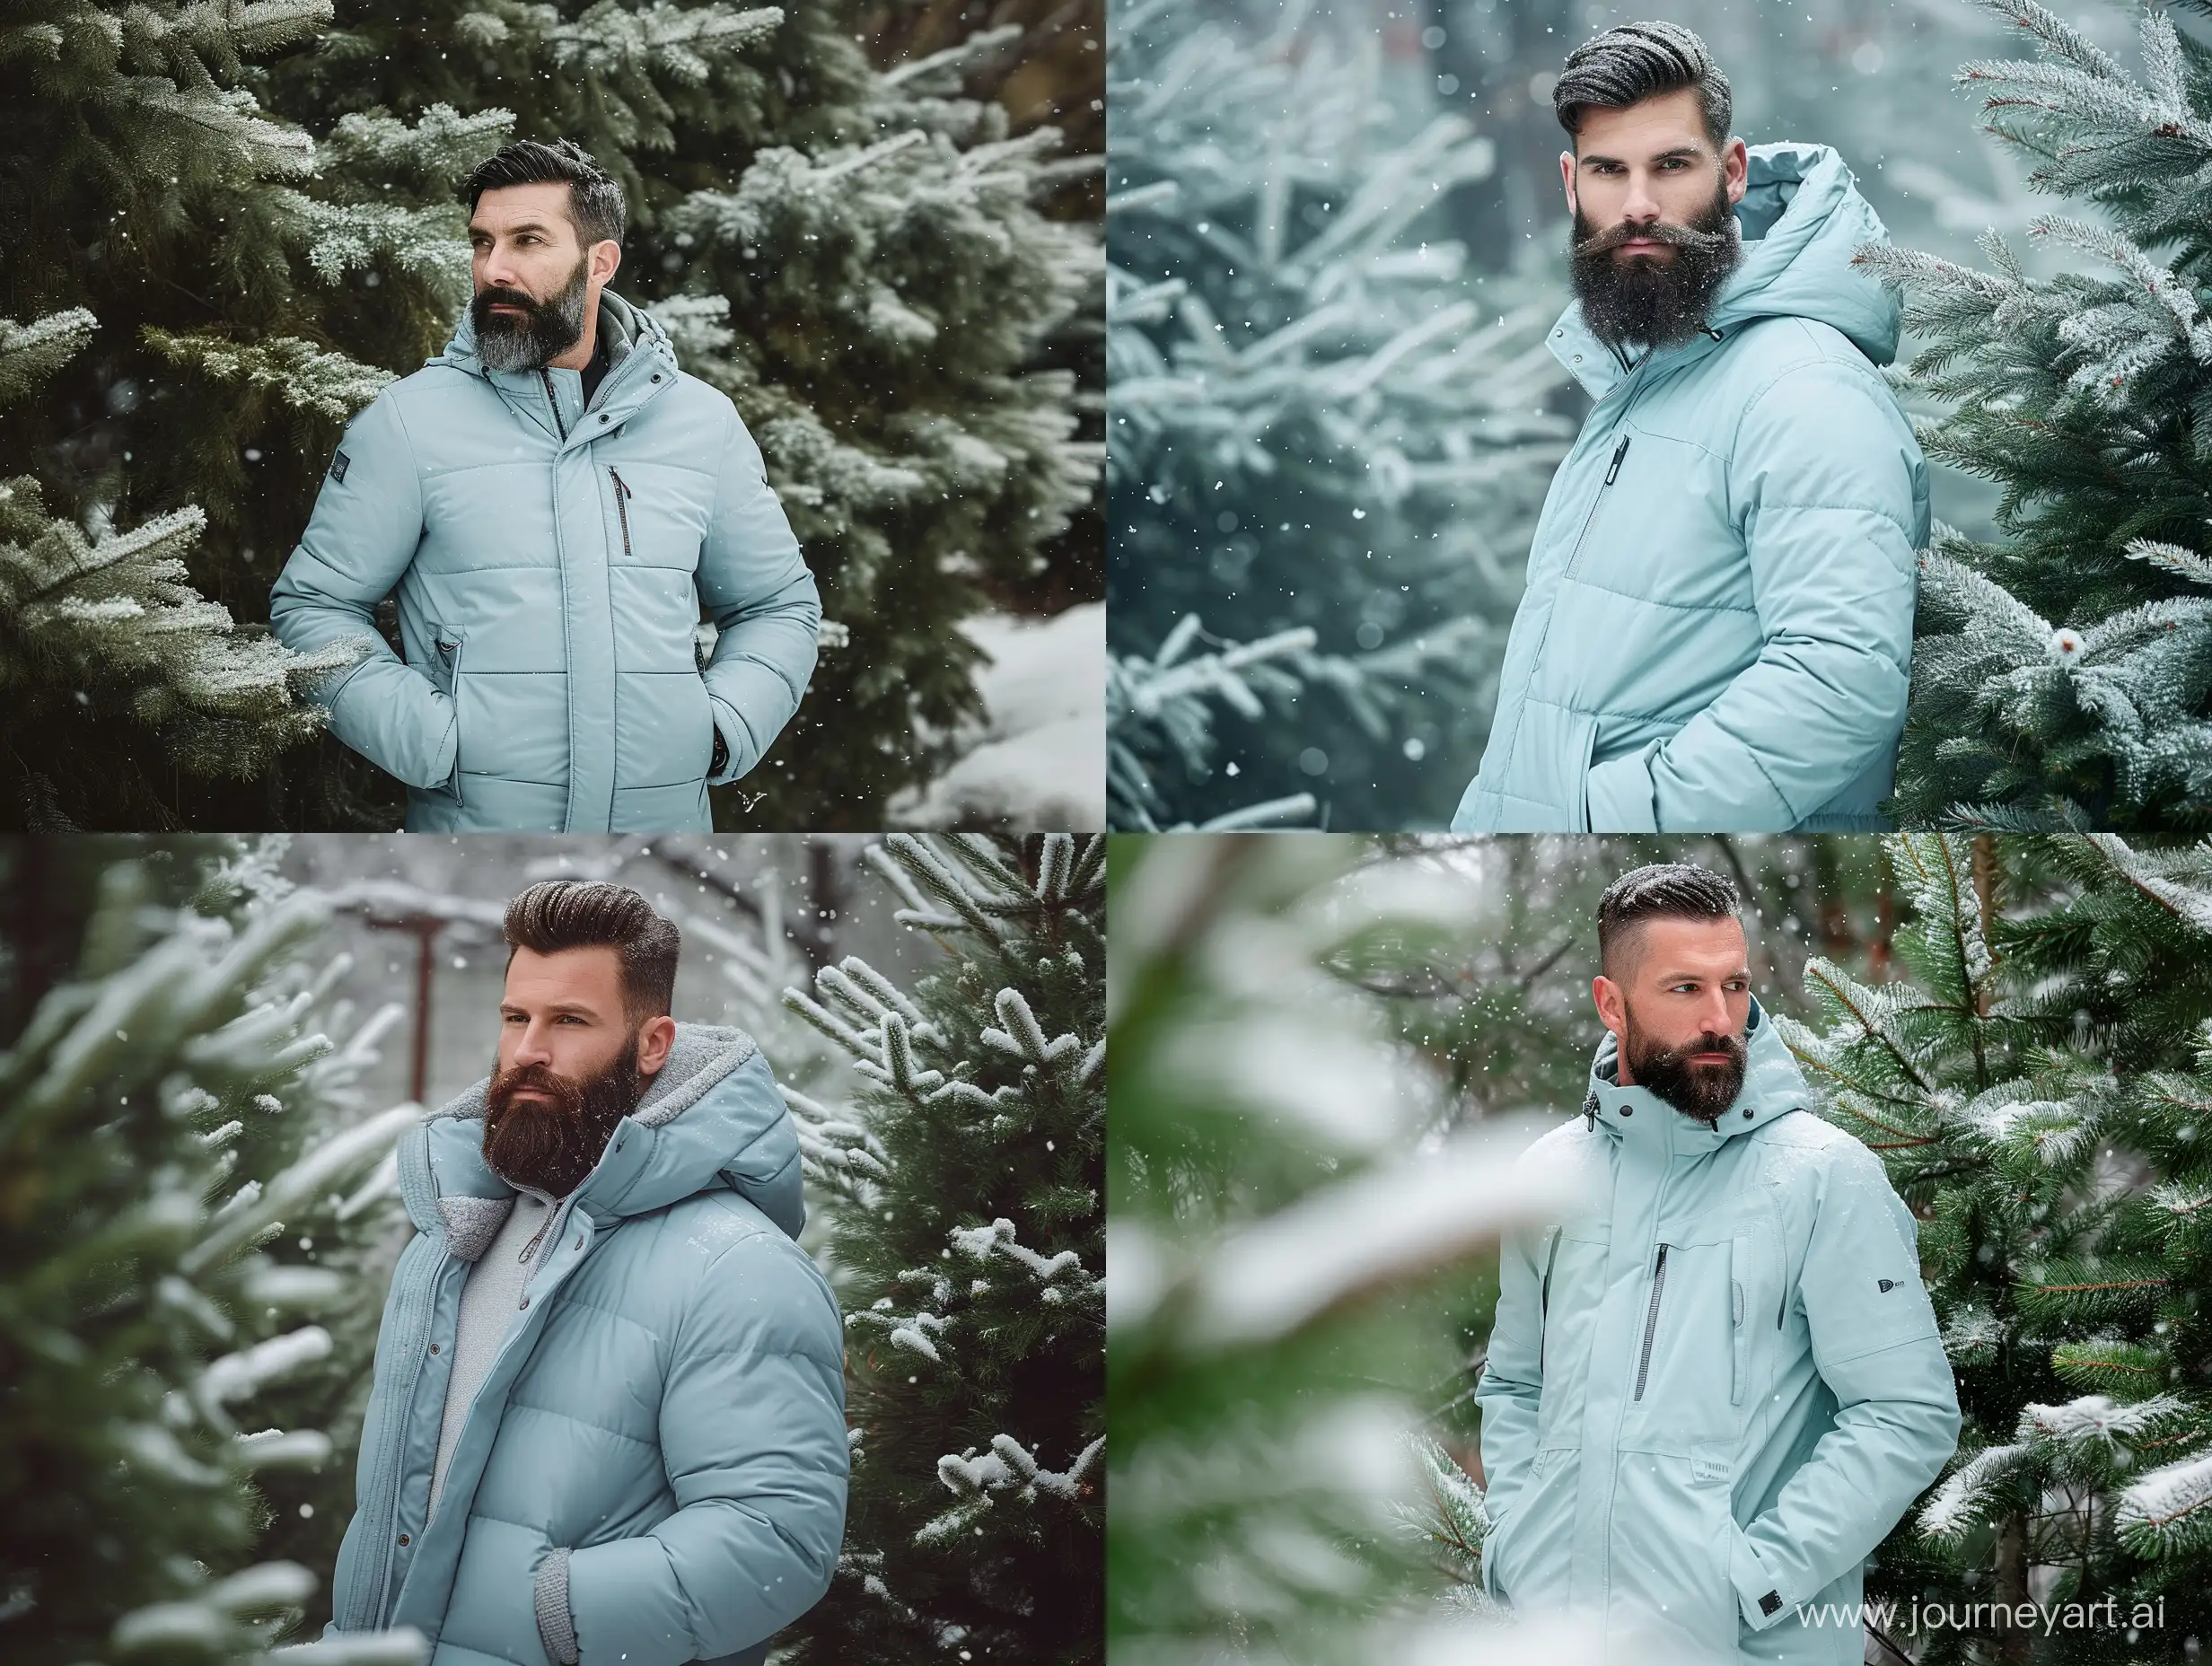 Capture the winter vibe with a real bearded man donned in a stylish light blue winter jacket, photographed full-body from head to toes. Placed in a setting with evergreen trees lightly dusted in snow, the scene balances the winter ambiance with hints of green. The natural light highlights the jacket's modern texture, and subtle snowflakes add a touch of seasonal magic. The result is a harmonious blend of contemporary fashion against a winter landscape, where the man's presence stands as a testament to both style and an authentic connection to the seasonal surroundings.